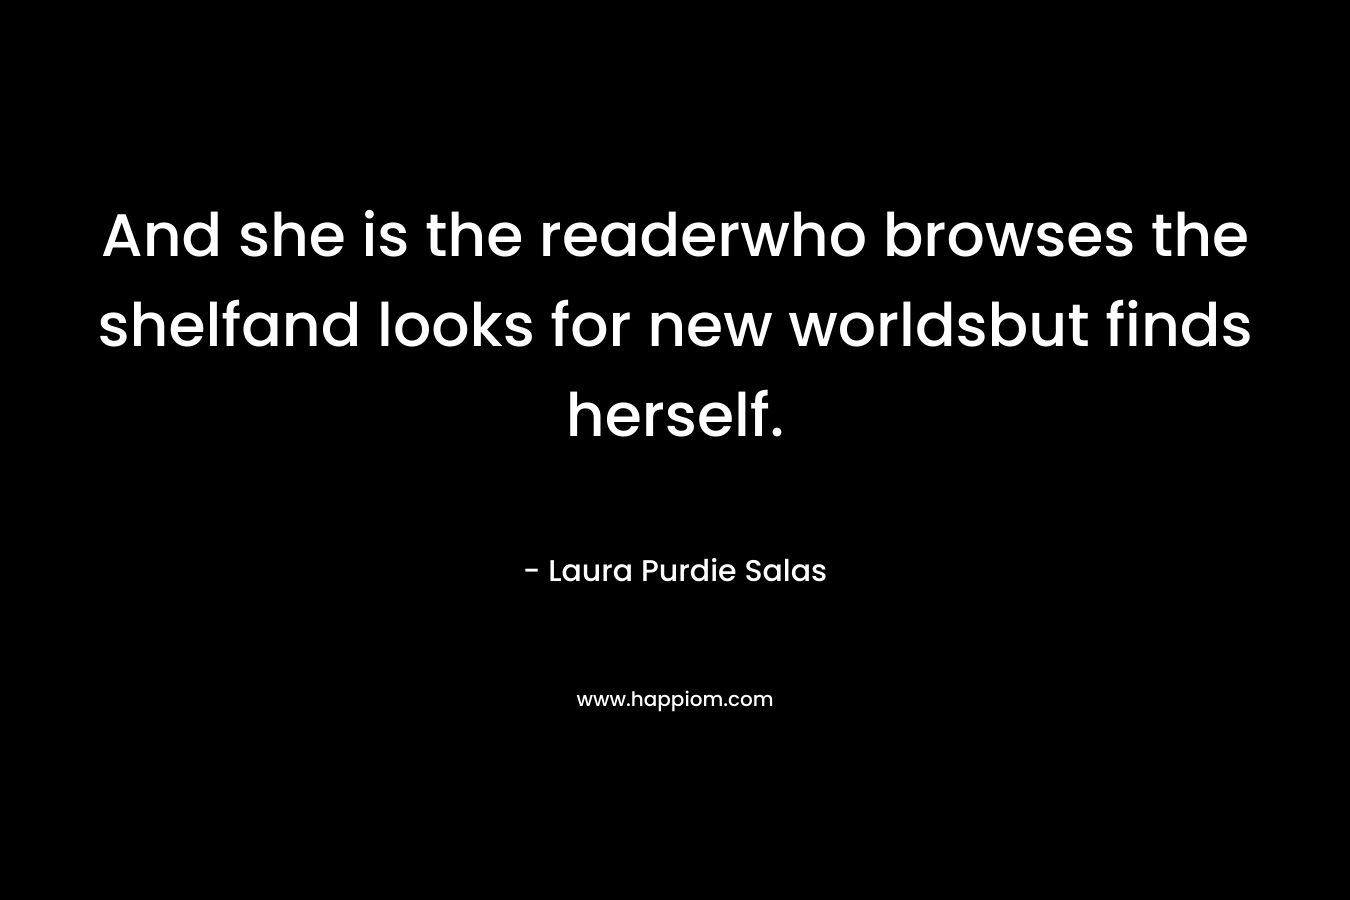 And she is the readerwho browses the shelfand looks for new worldsbut finds herself.